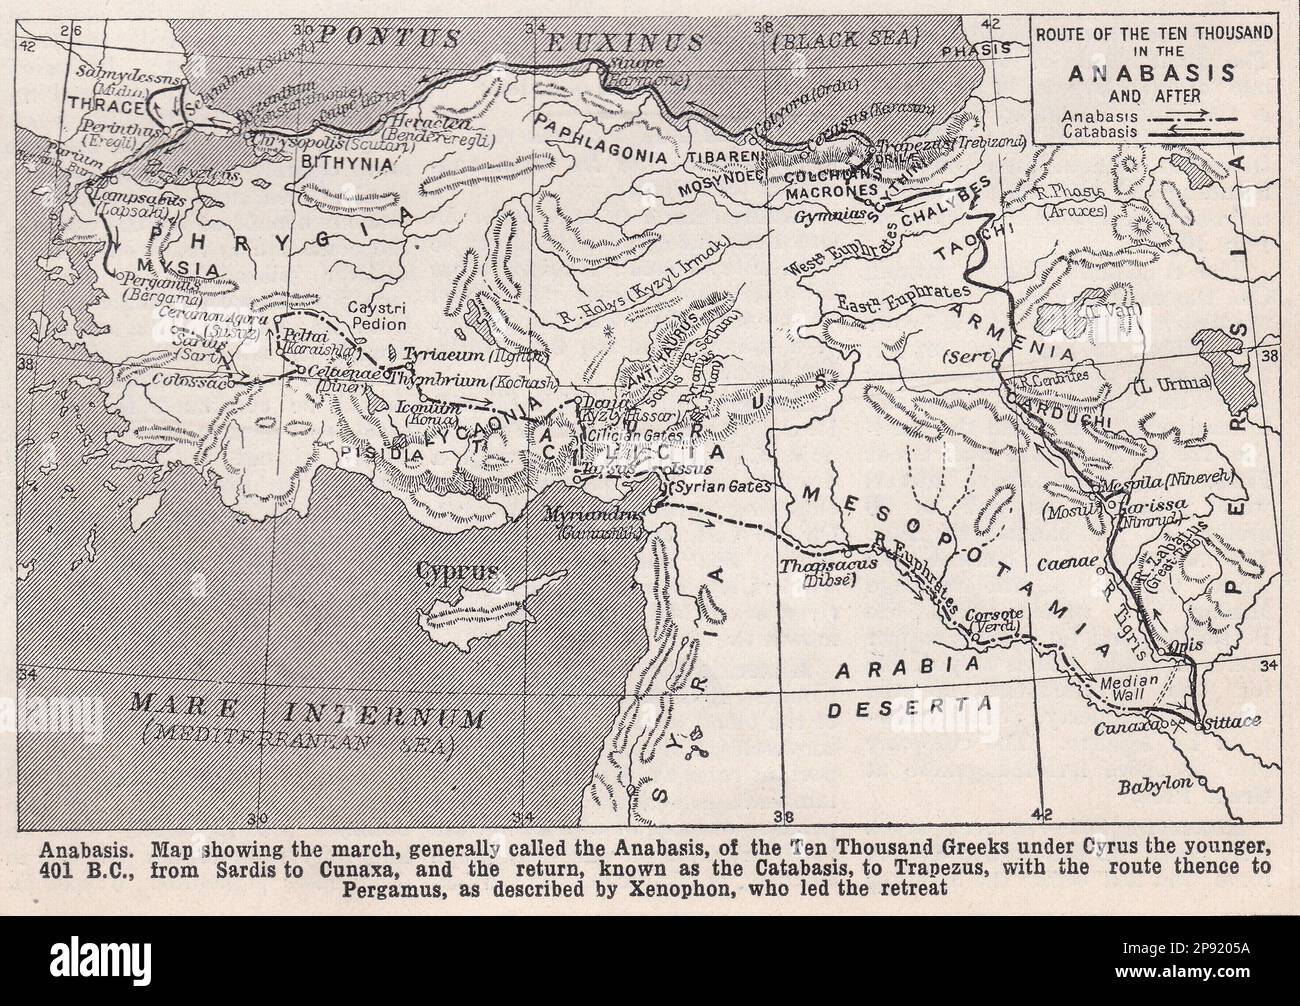 Vintage map showing the march of the Anabasis, of the Ten Thousand Greeks under Cyrus the younger, 401 B.C. from Sardis to Cunaxa and Catabasis. Stock Photo